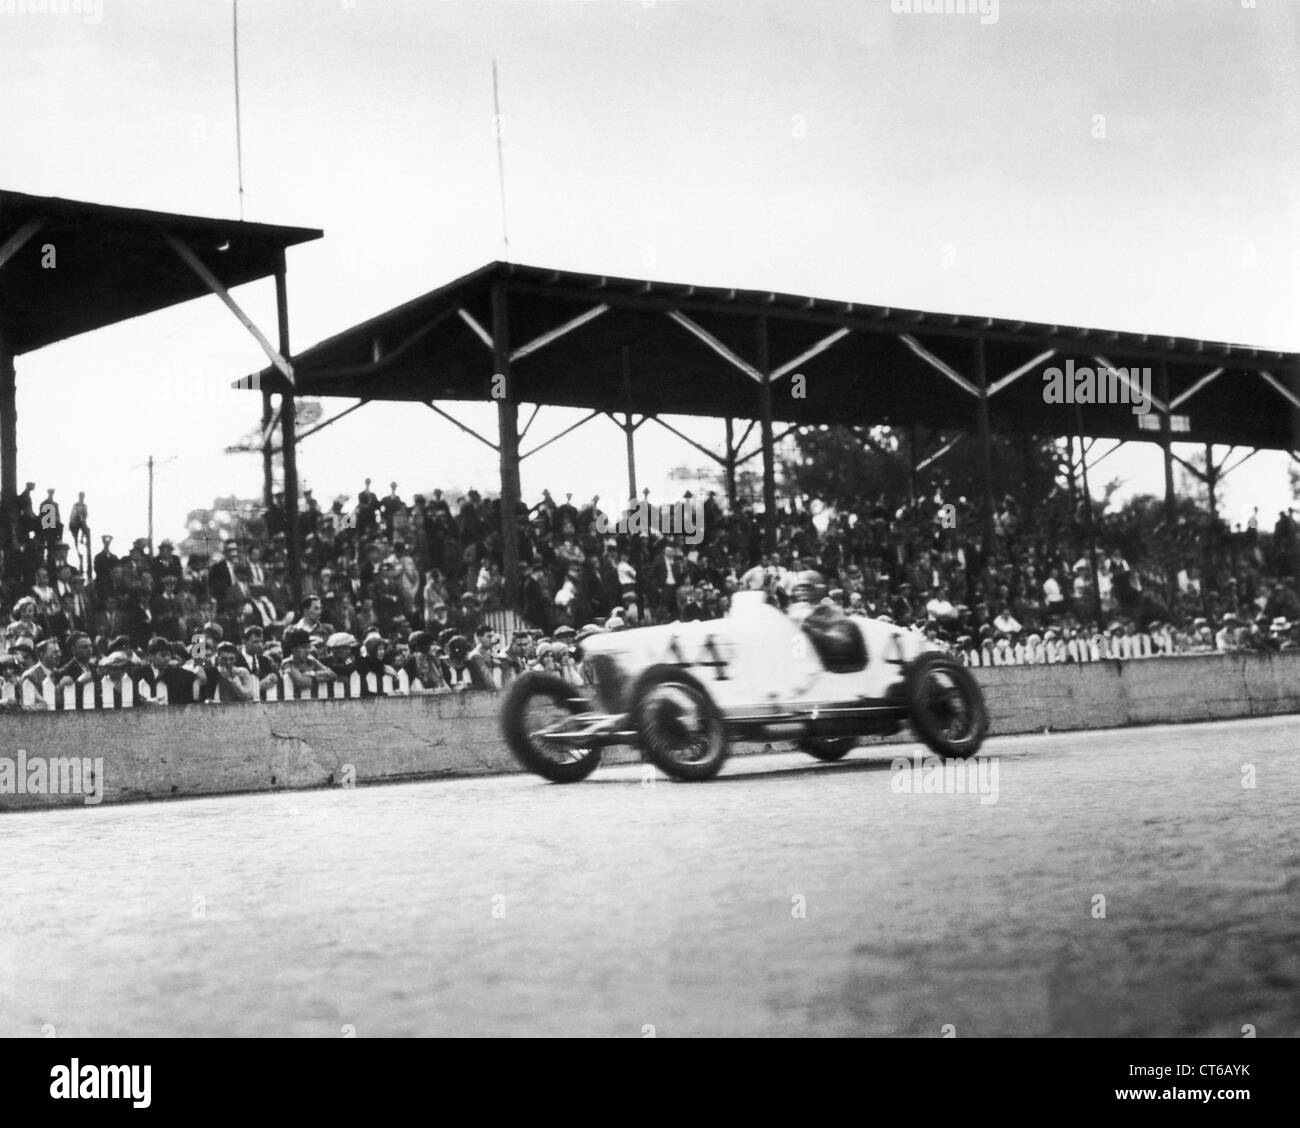 Vintage image of auto in race Stock Photo